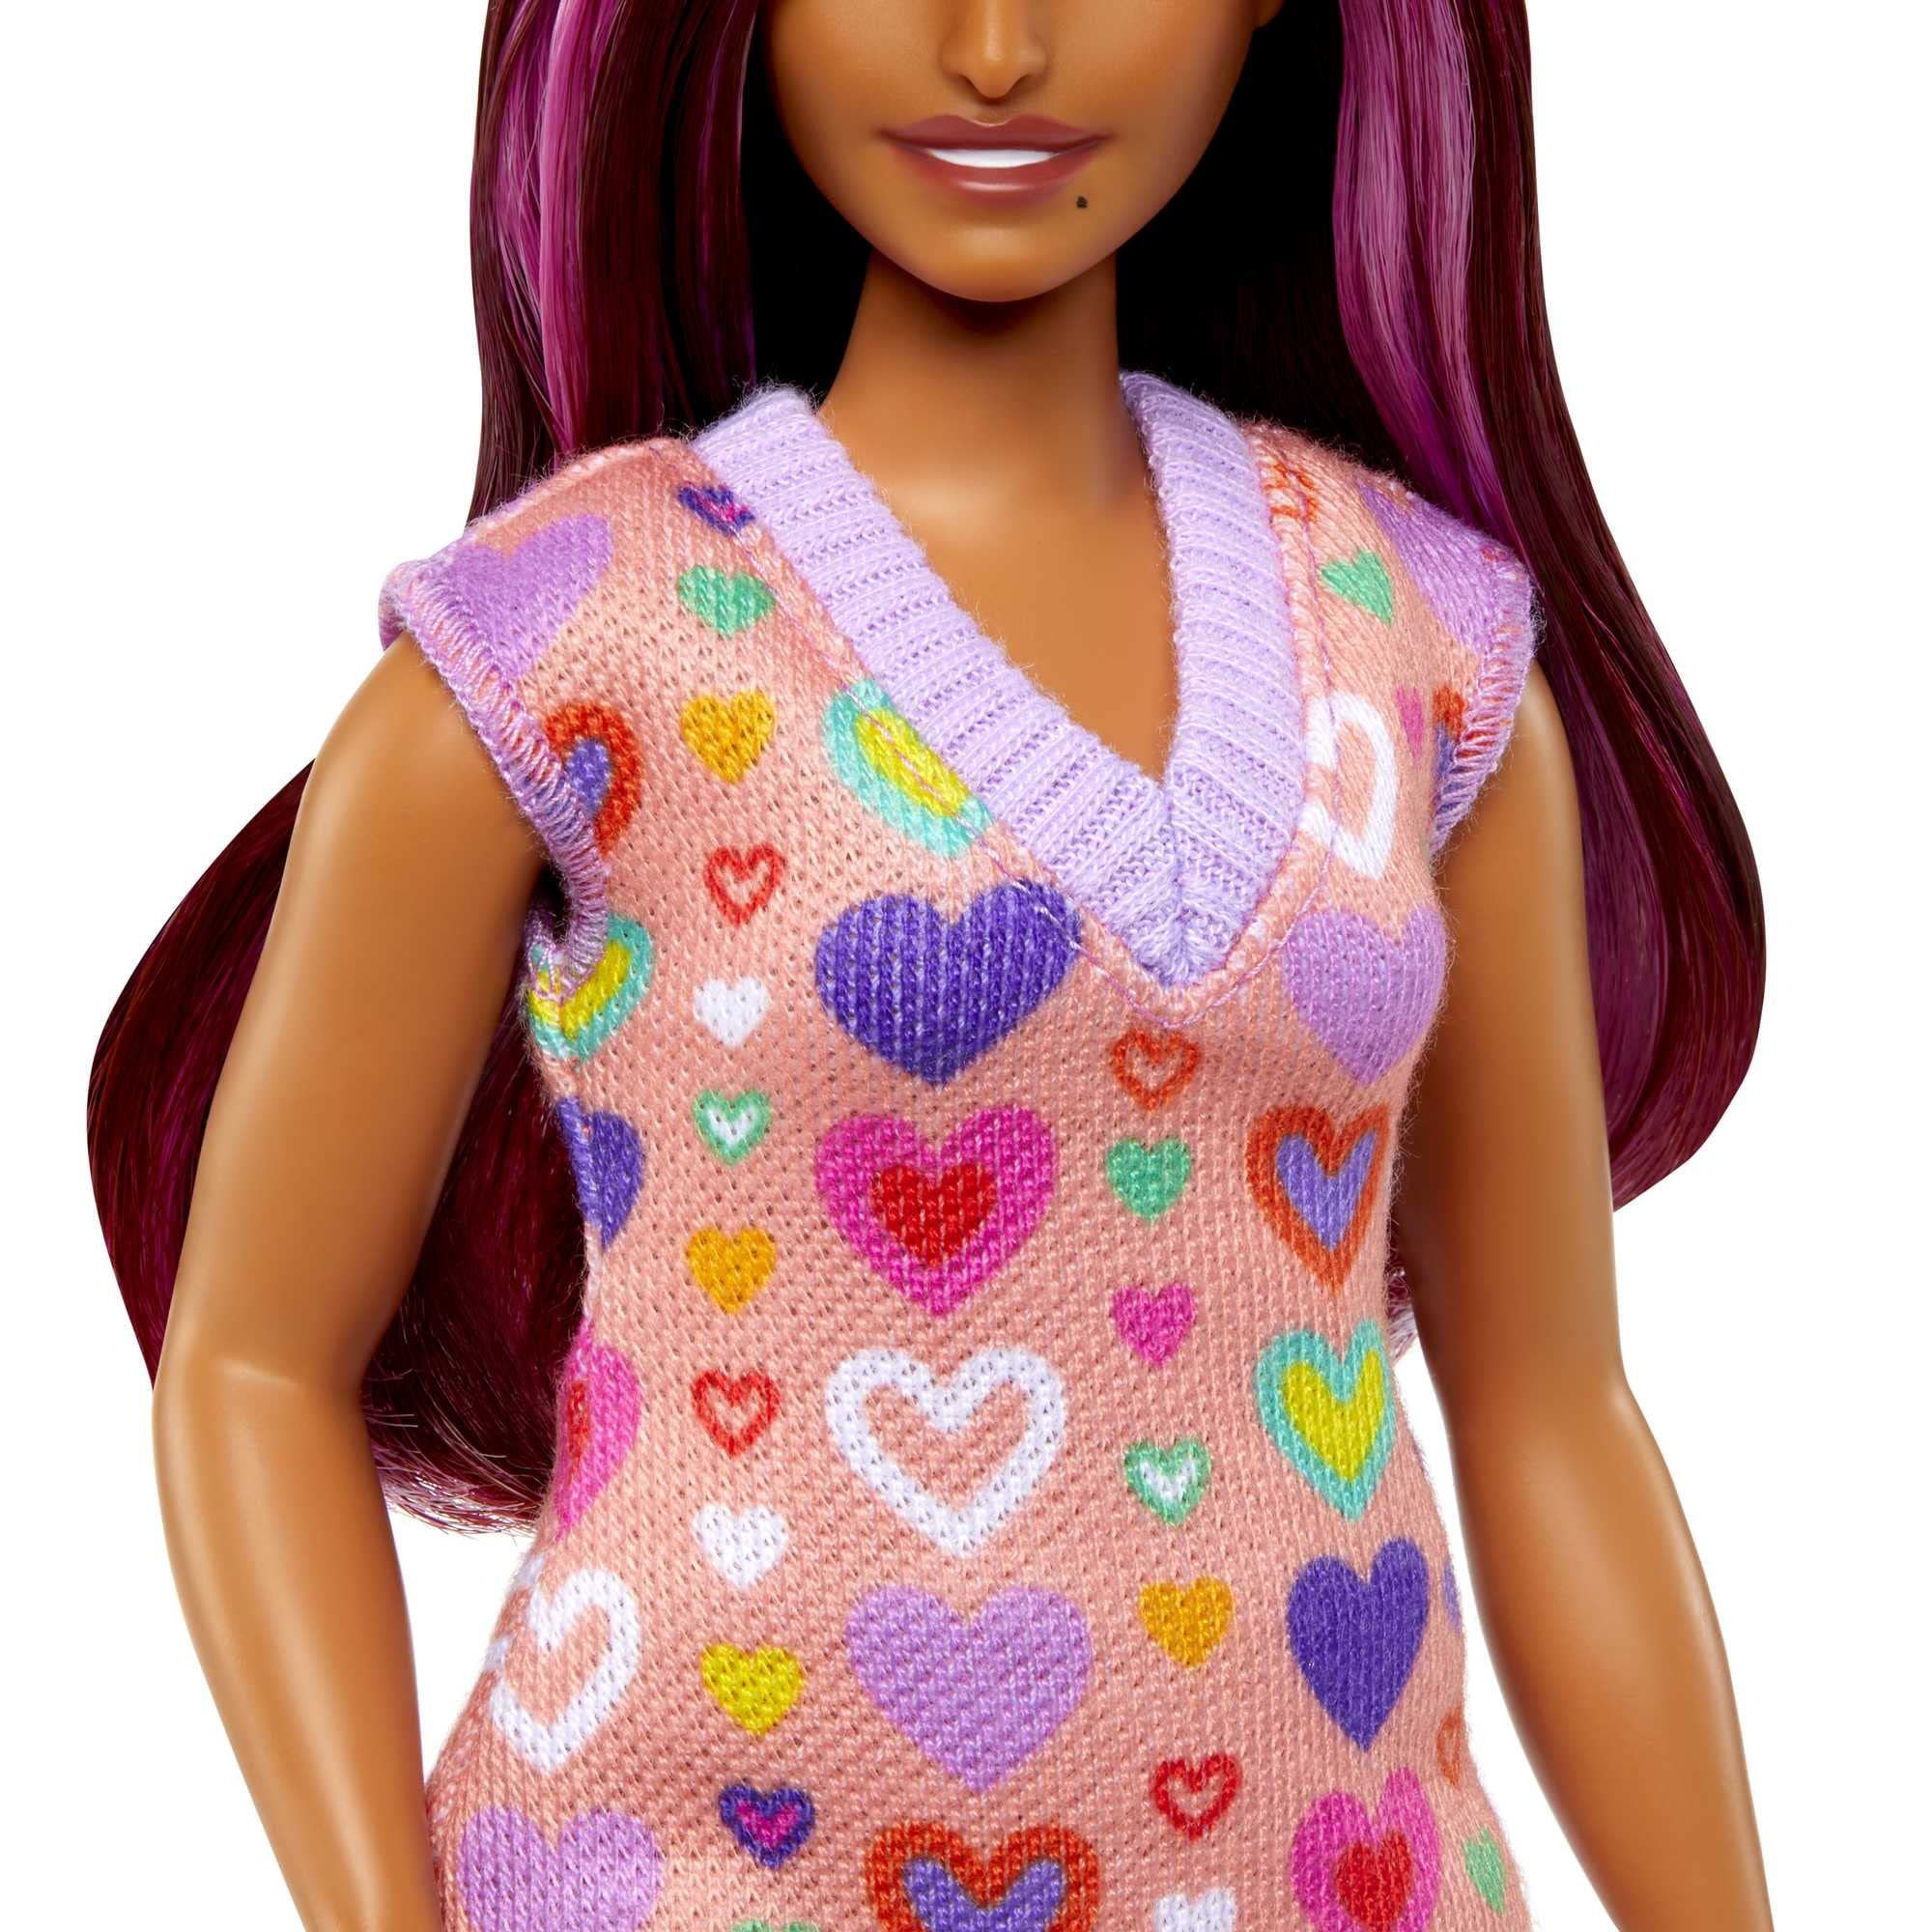 Barbie Fashionistas Doll #207 with a Heart-Print Sweater Dress, Sunglasses and Platform Shoes